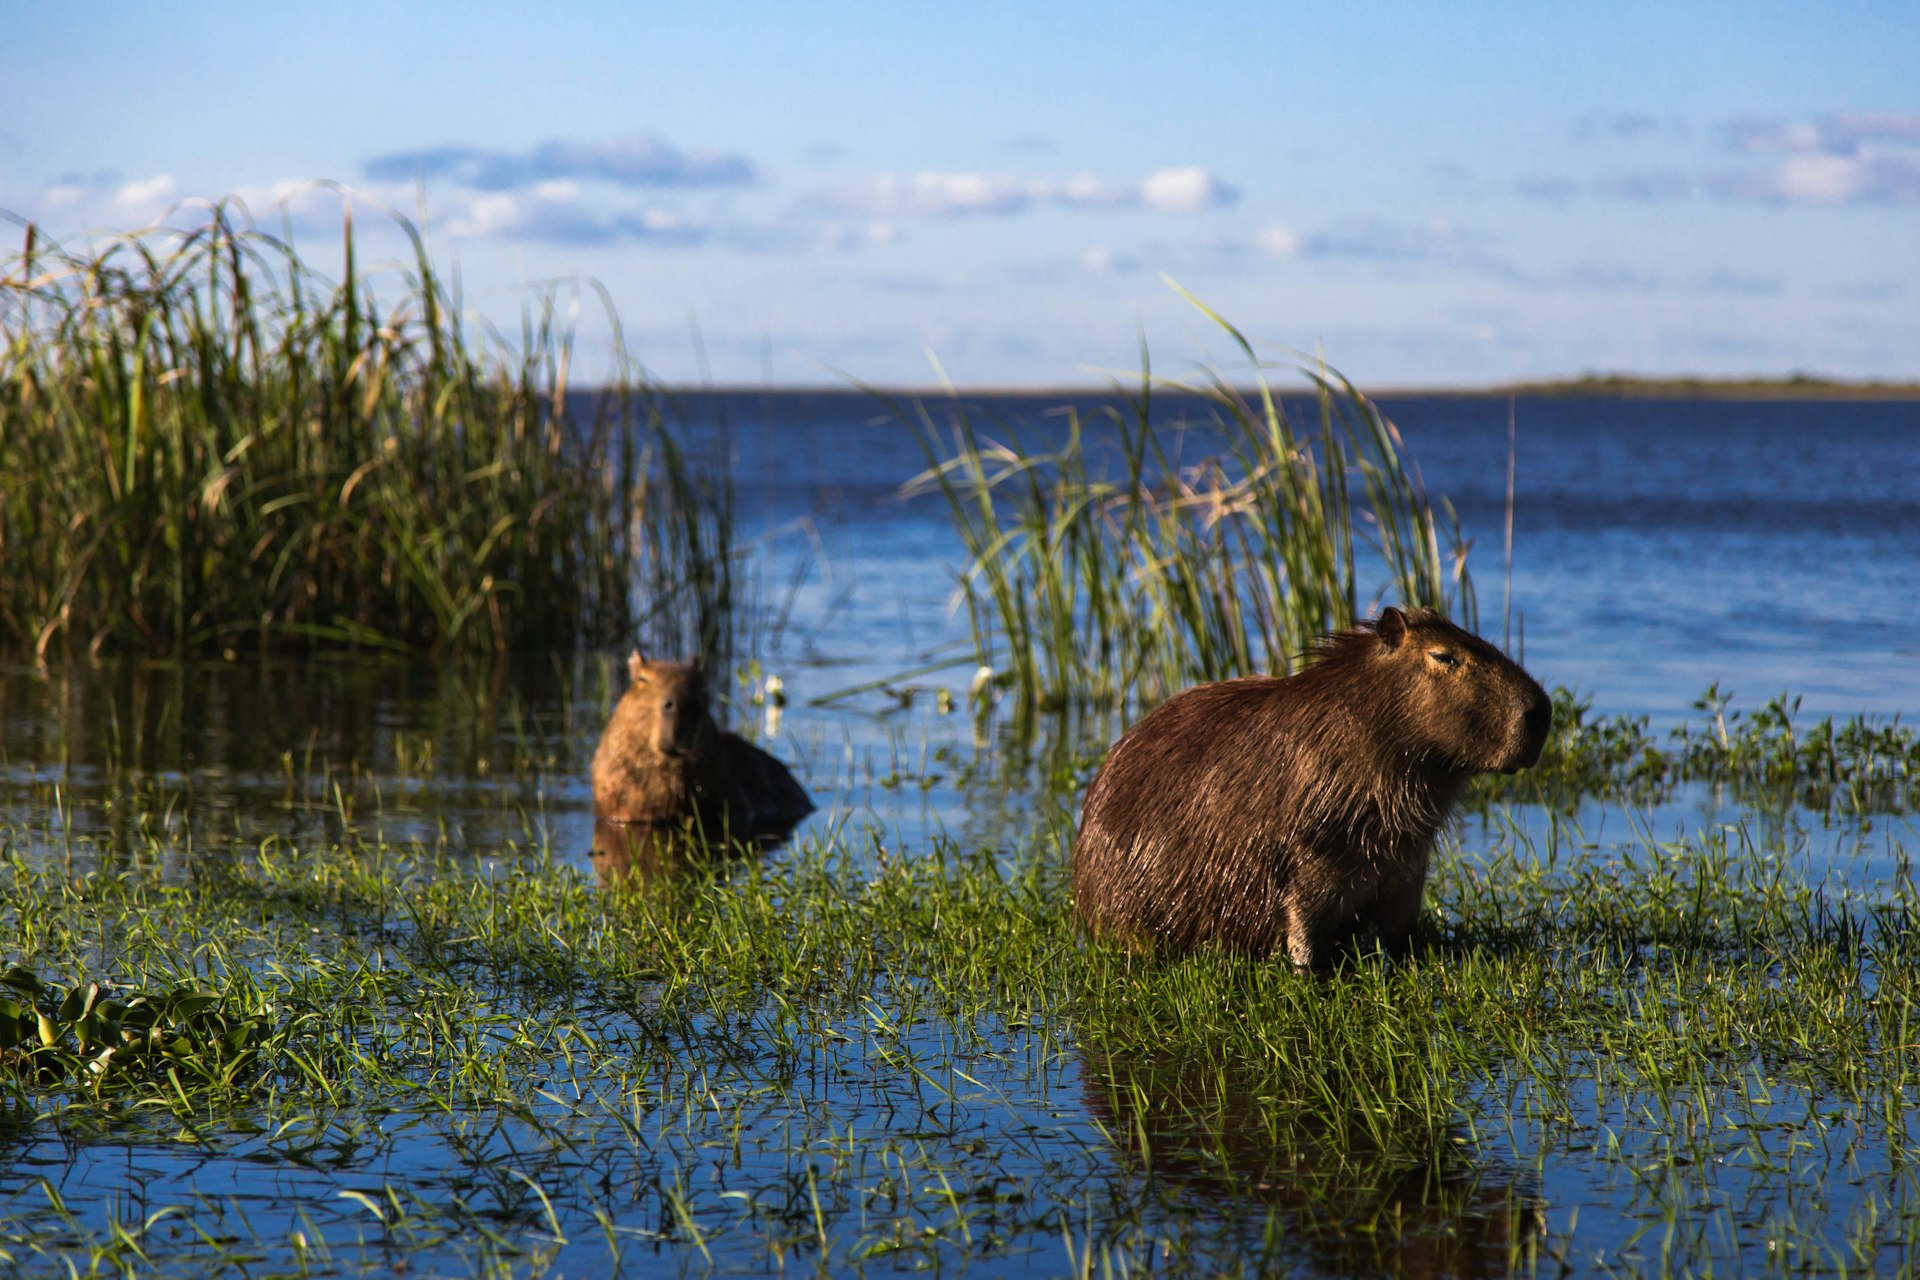 Two capybaras are standing in water, surrounded by long grasses in the Esteros Del Iberá wetlands in Argentina